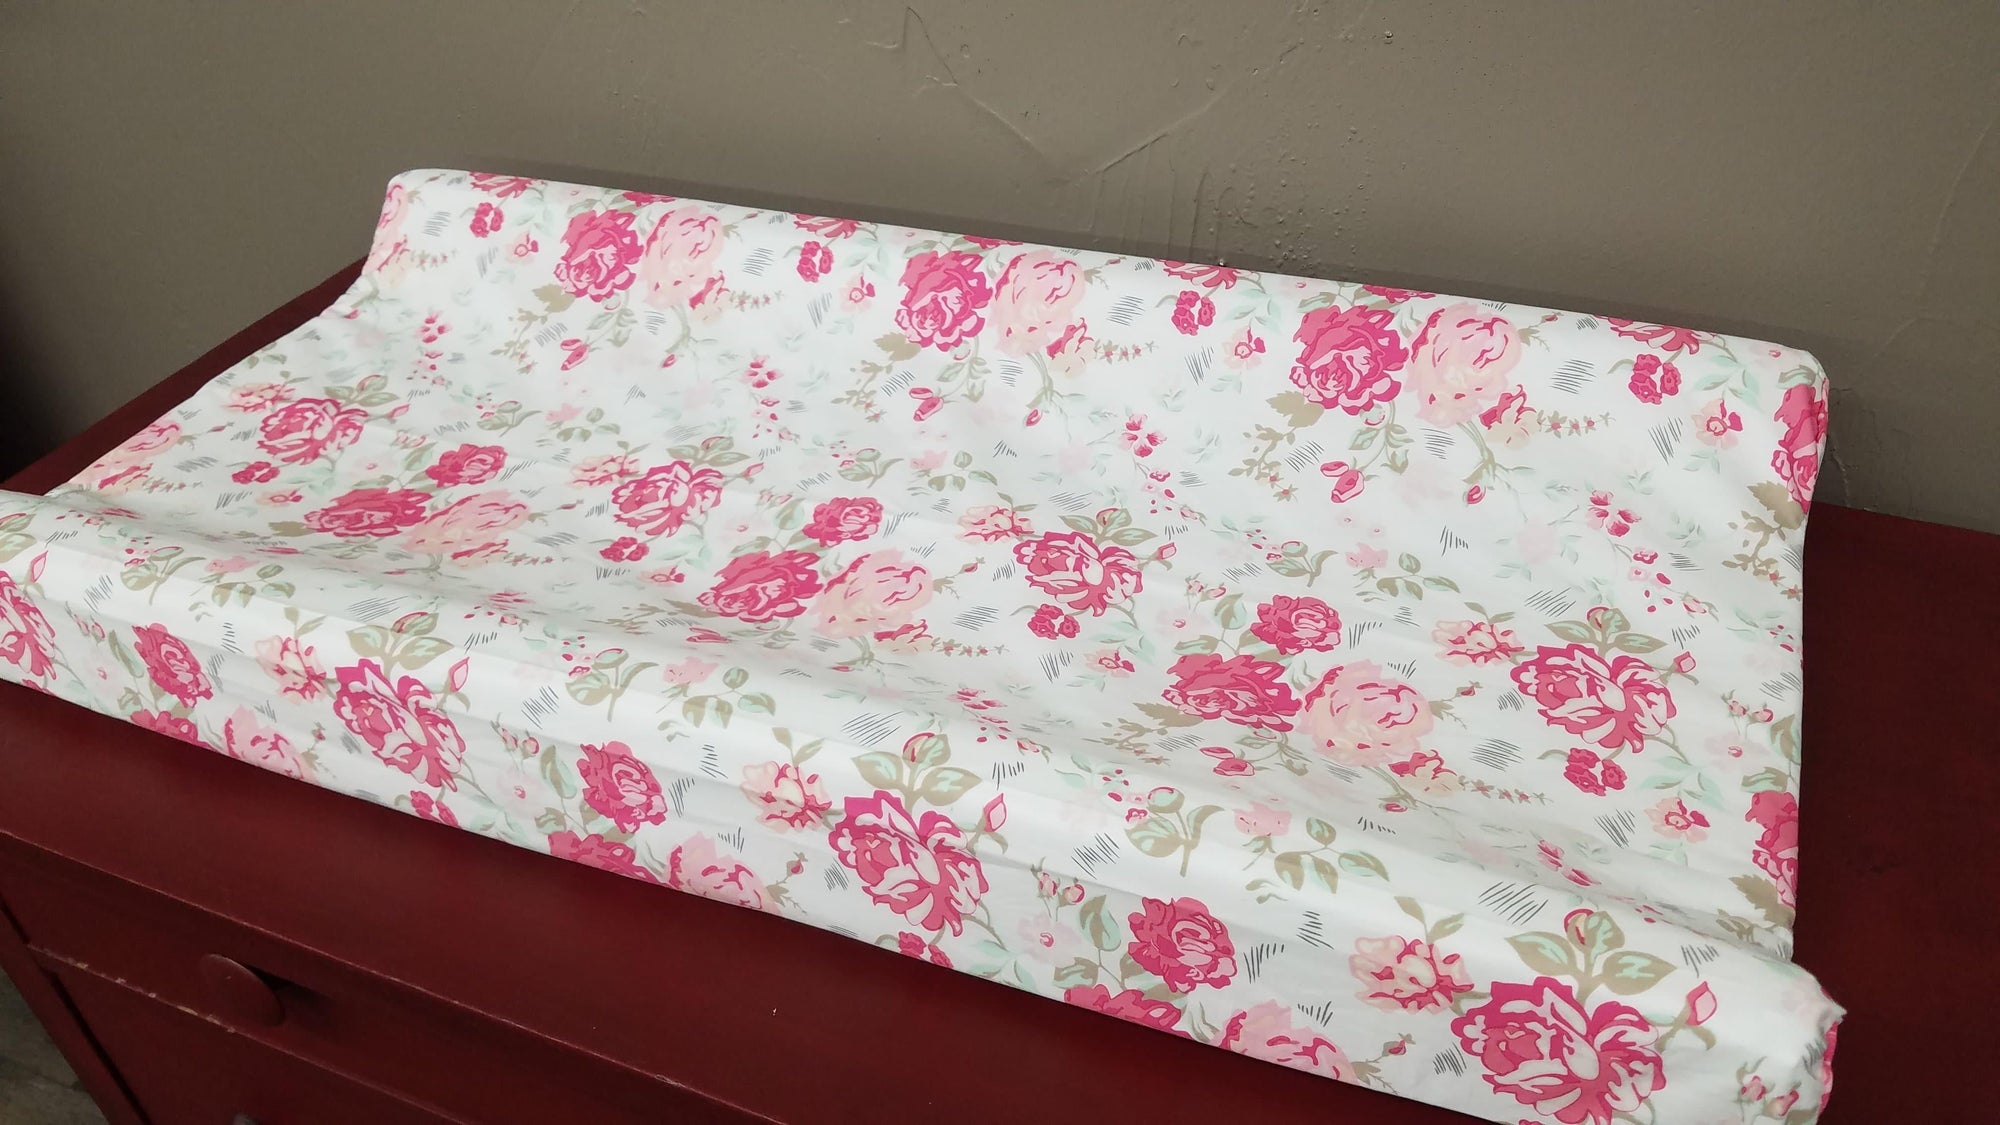 Changing Pad Cover - Floral in Romantic Roses - DBC Baby Bedding Co 